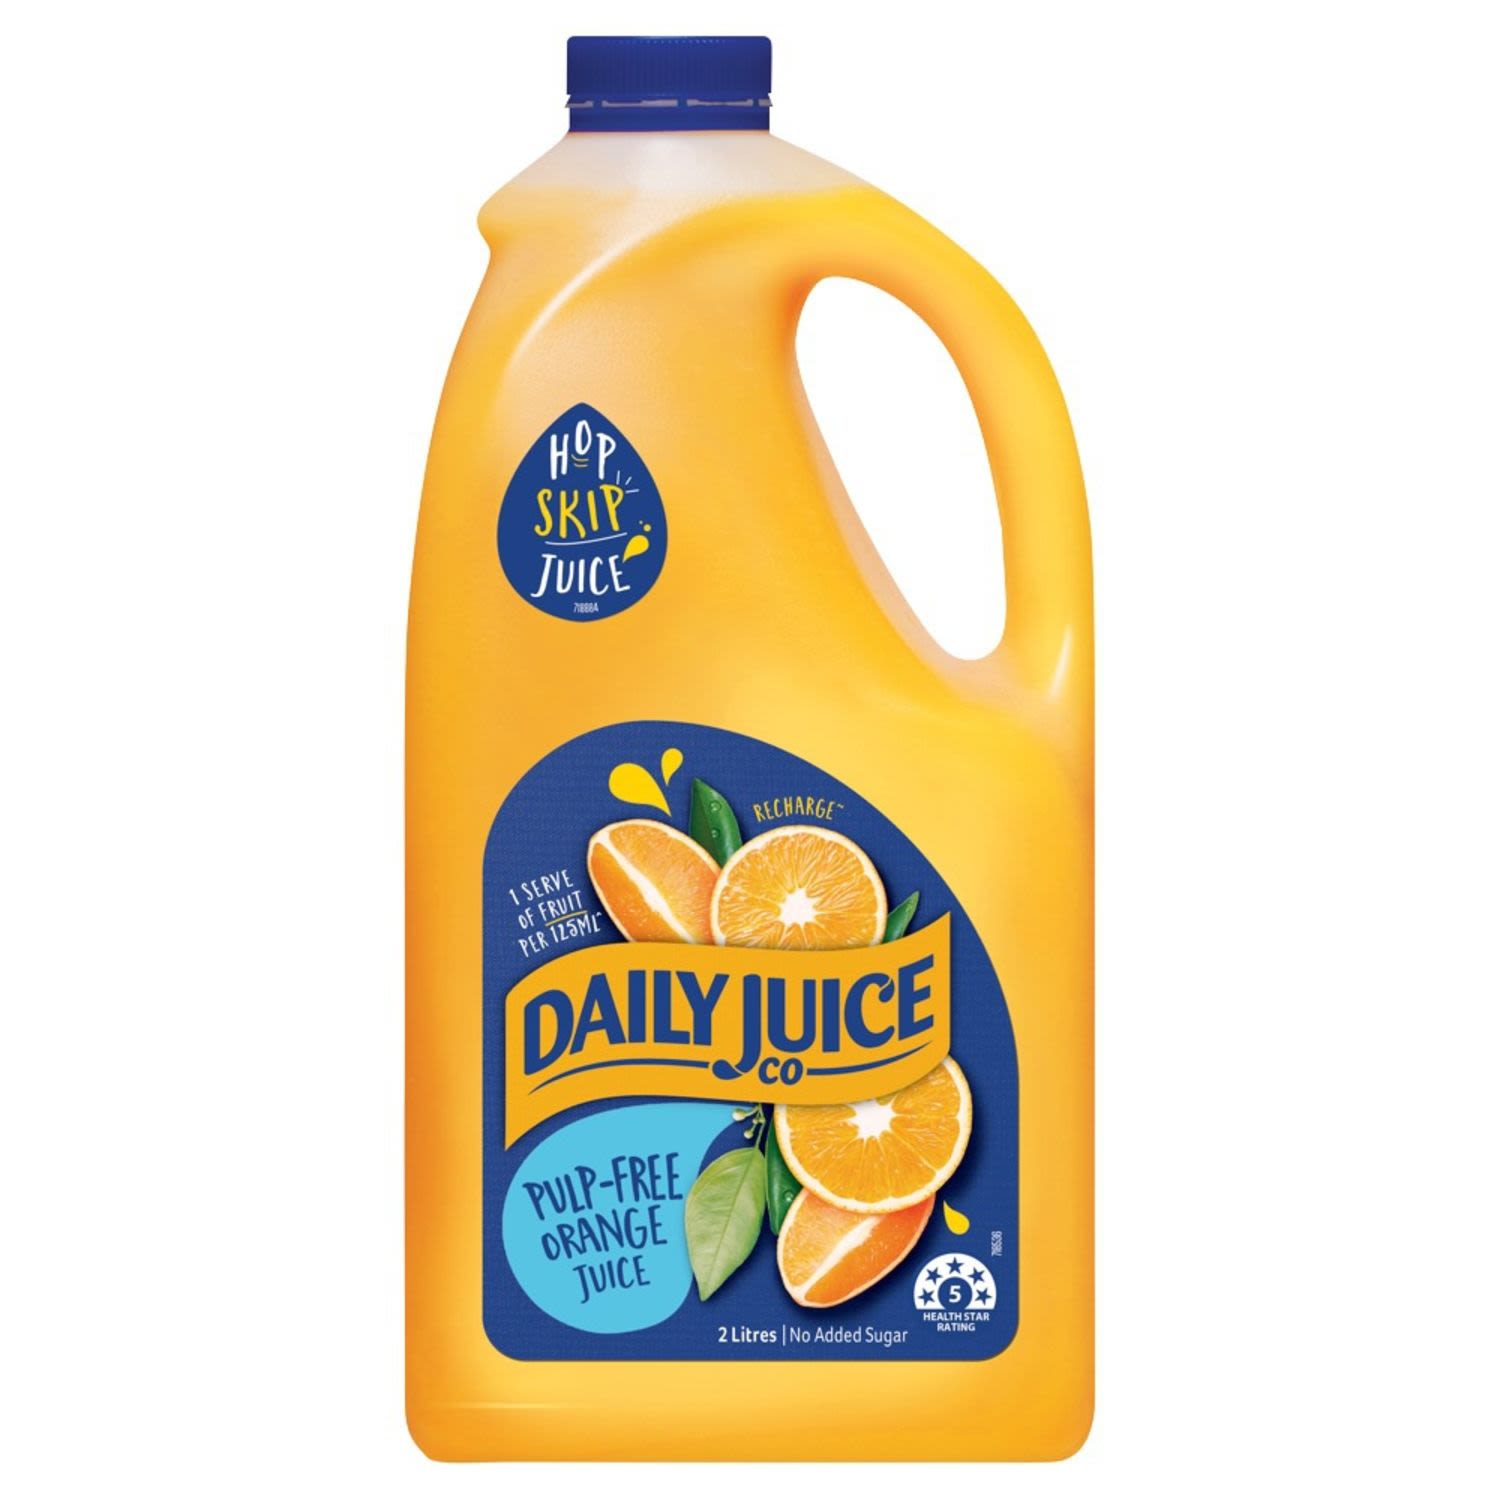 Daily Juice Orange is your daily dose of happiness! It is a delicious pulp free juice that’s perfect accompany your breakfast or refuel and refresh you throughout the day! Its packed with the good stuff to kick start your day with Vitamin C. It contains the goodness of fruit with one serve of fruit in 125mL of juice.<br /> <br /> <br /><br />Country of Origin: Packed in Australia from at least 30% Australian ingredients.